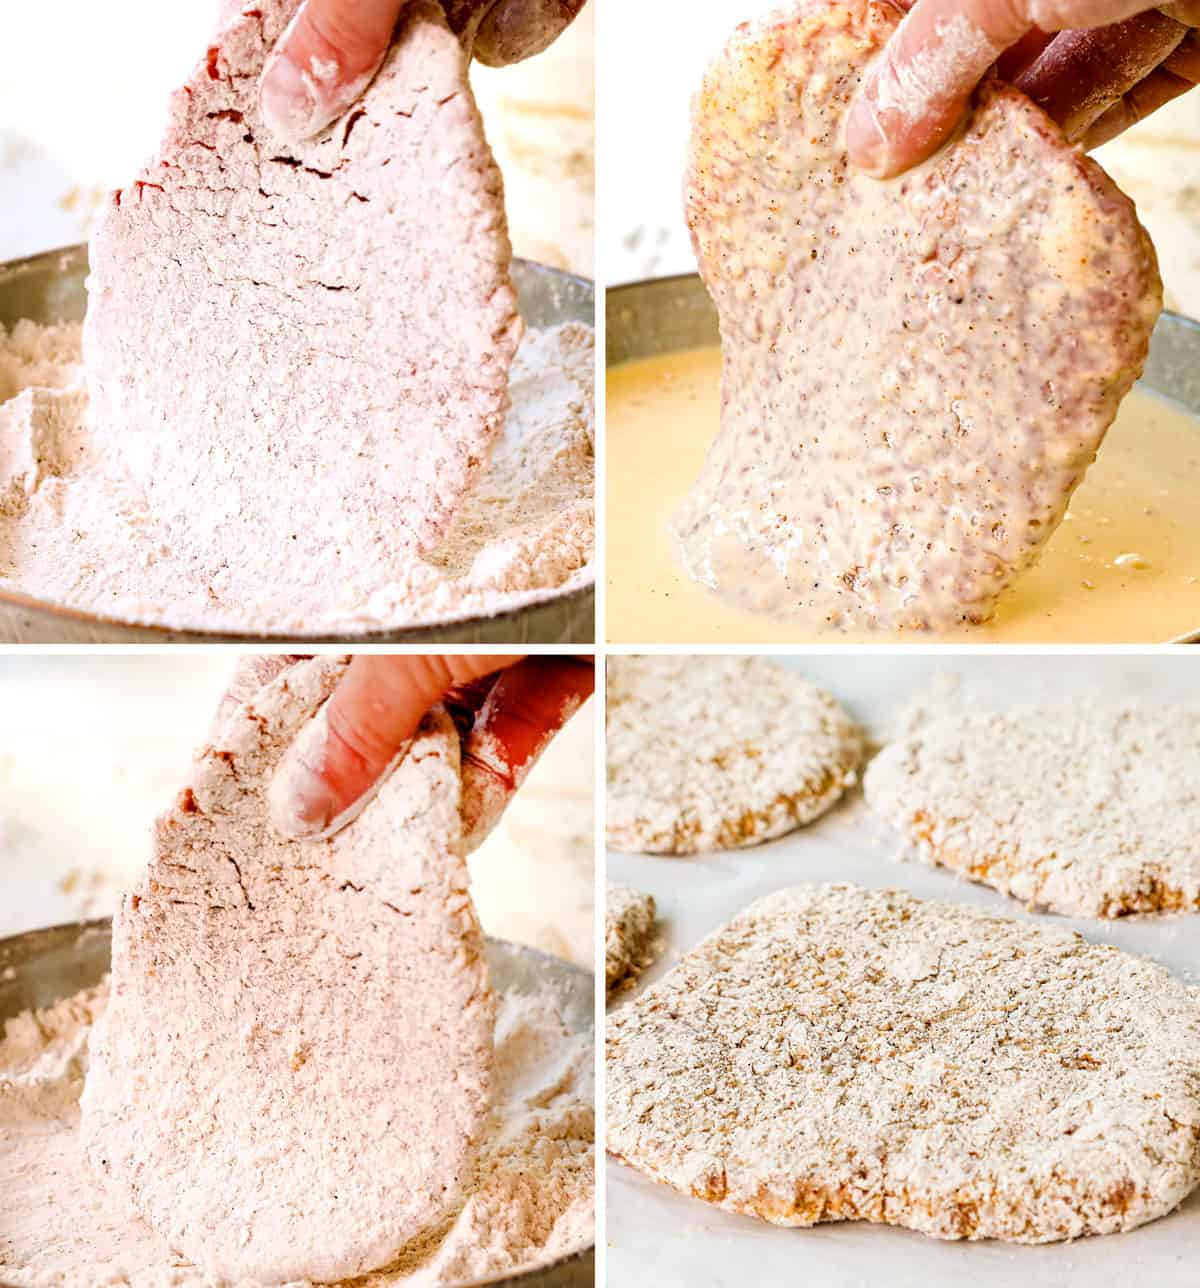 a collage showing how to make chicken fried steak (country fried steak) by dredging in flour, followed by eggs/buttermilk, followed by flour